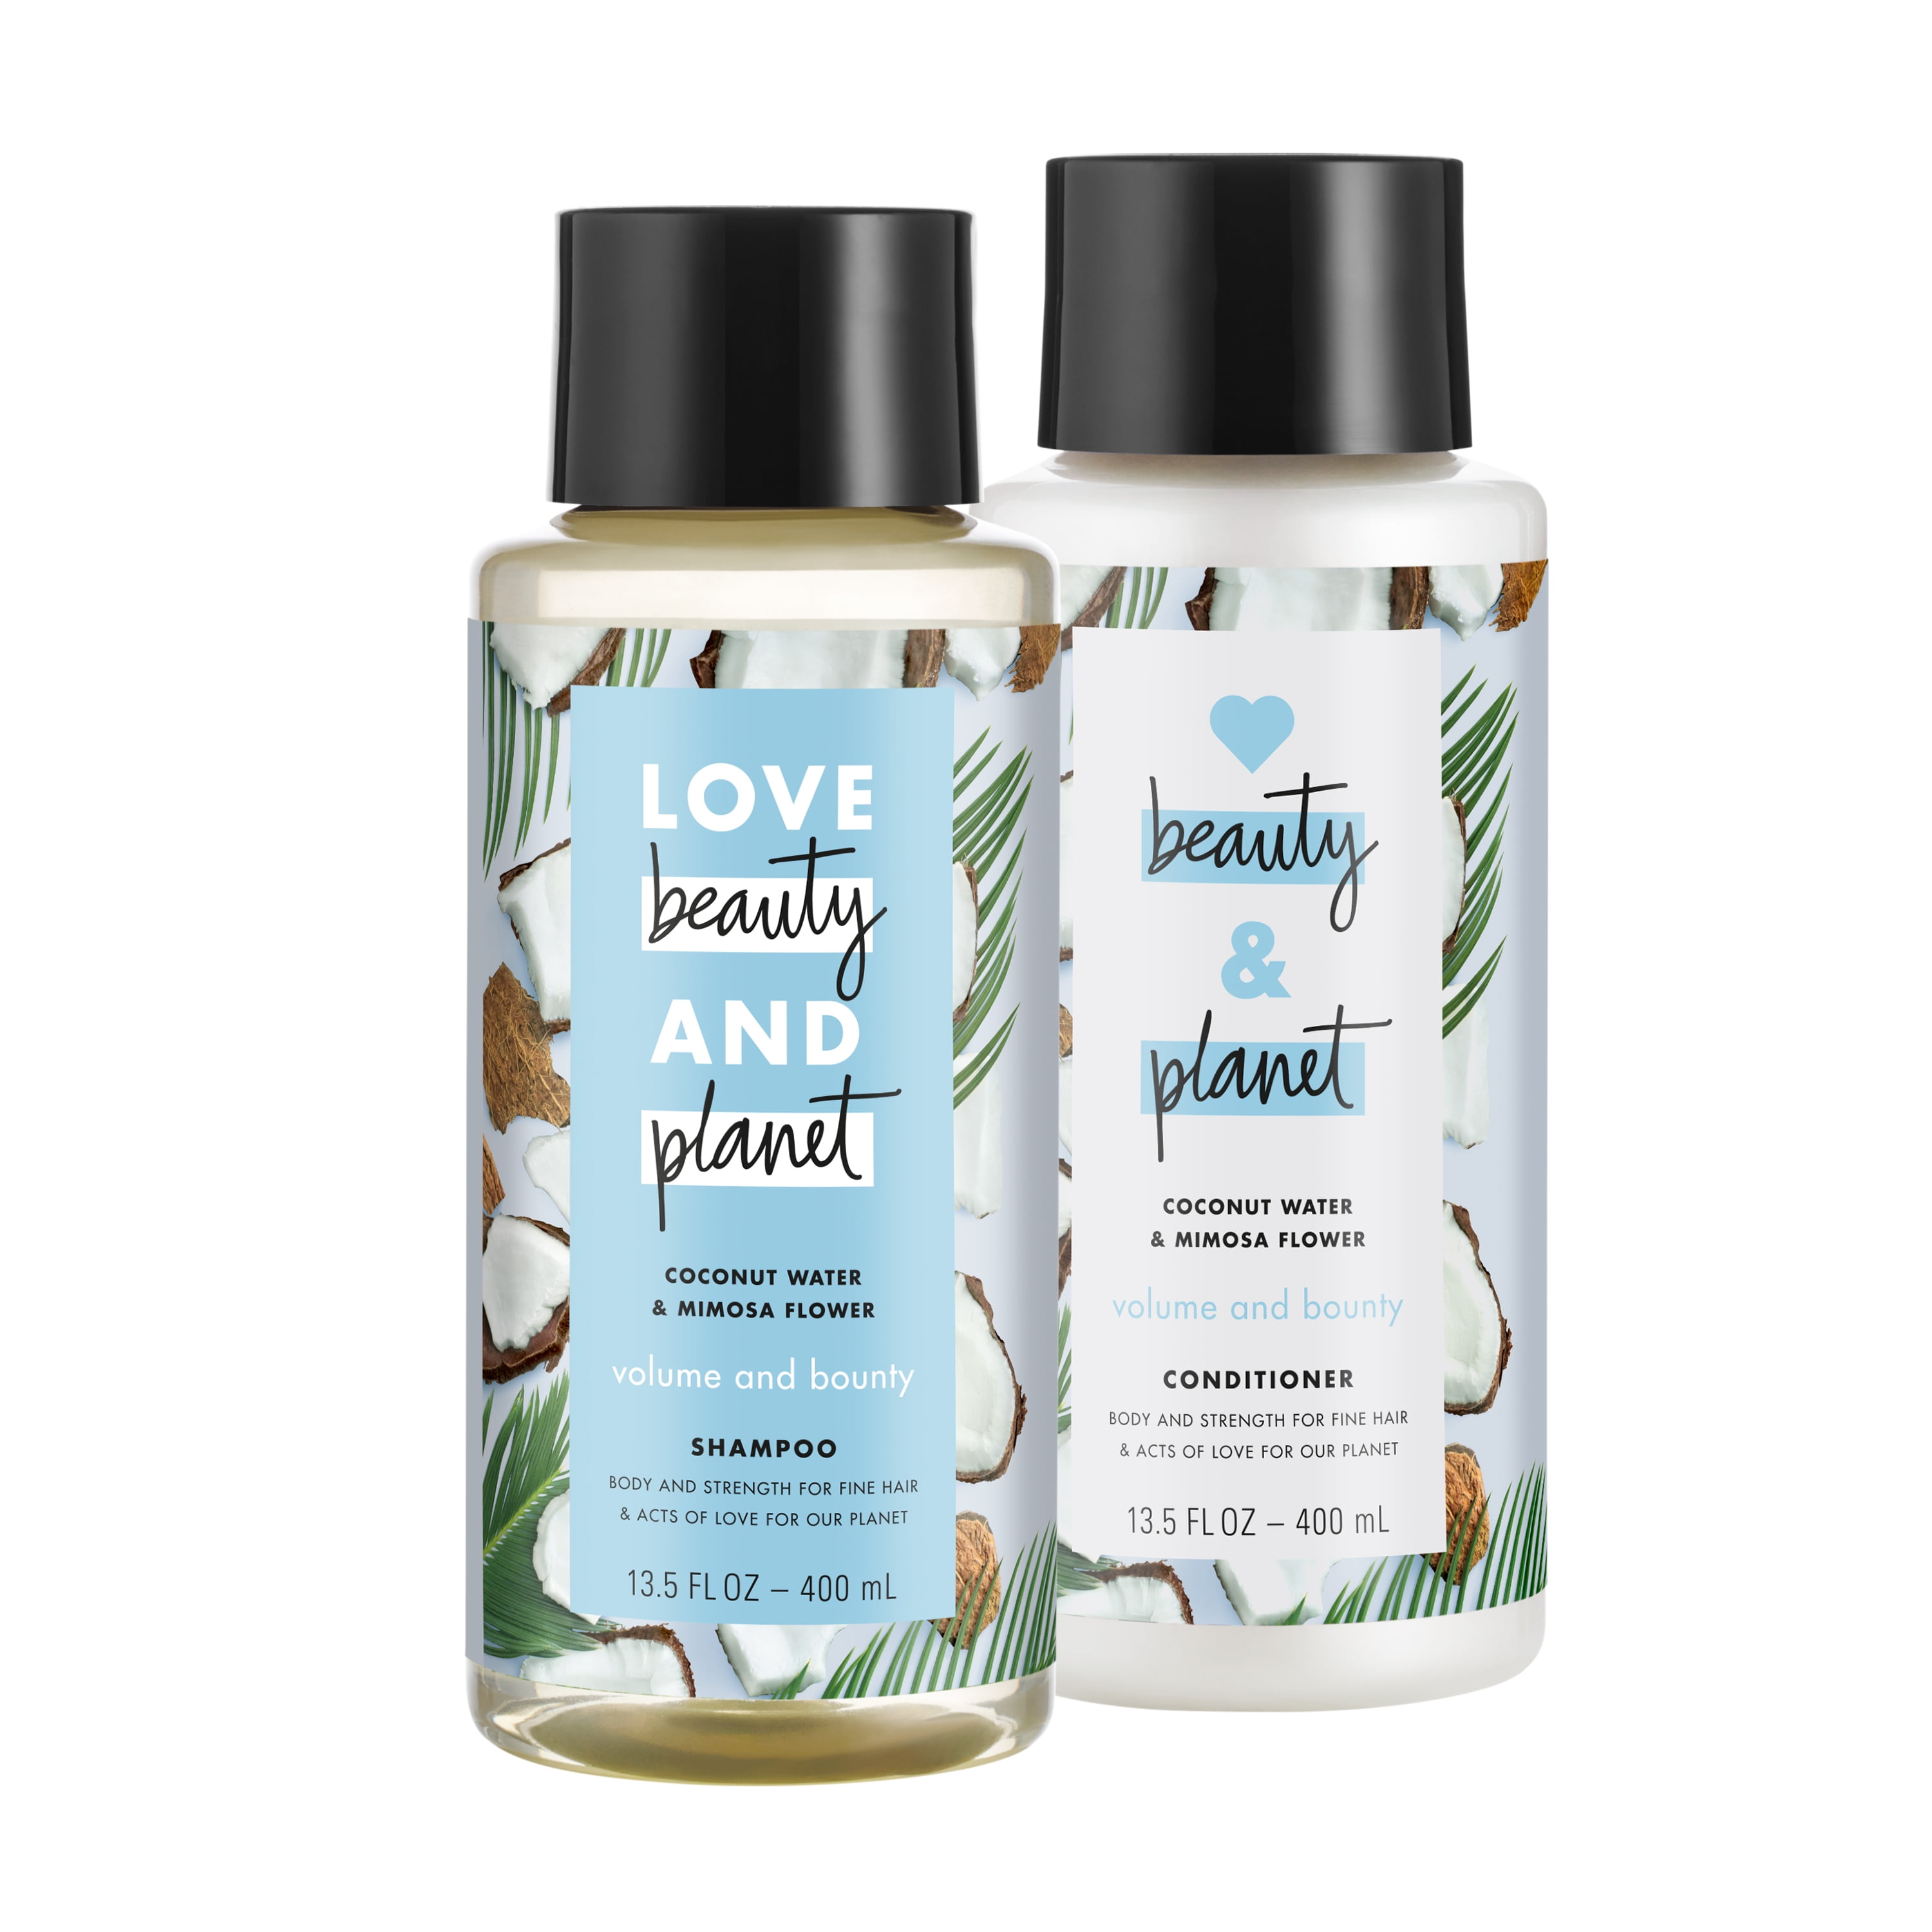 Love Beauty and Planet Shampoo and Conditioner, Paraben Free, Silicone Free, and Coconut Water & Mimosa Flower,, 13.5 oz, 2 - Walmart.com